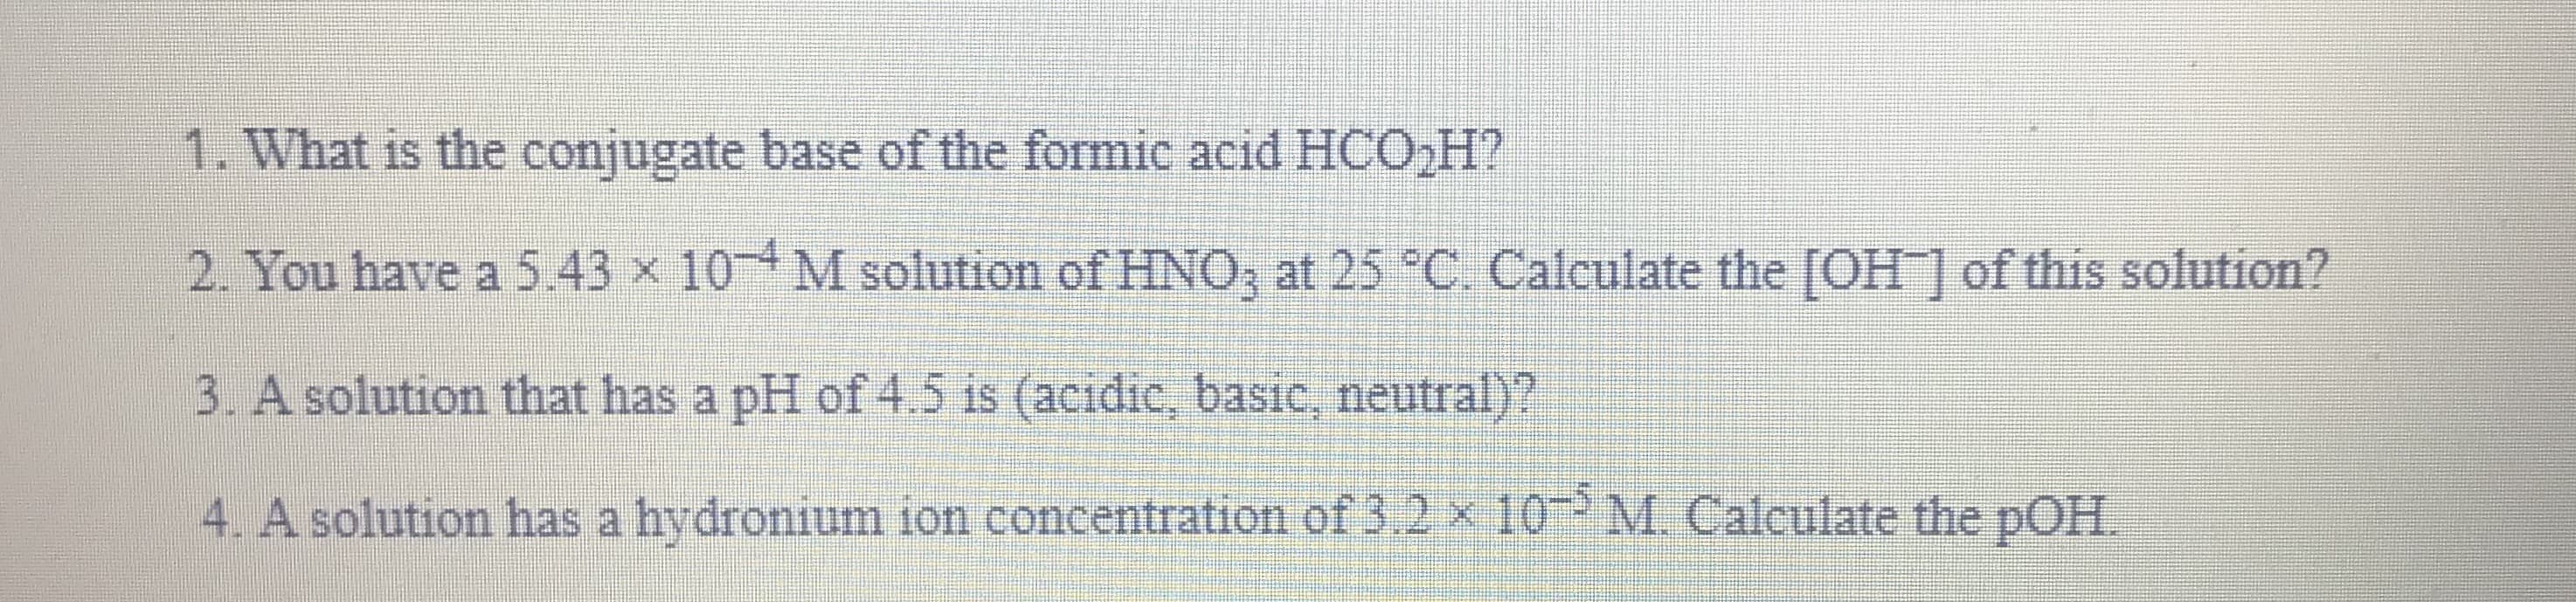 1. What is the conjugate base of the formic acid HCO,H?
2. You have a 5.43 x 10 M solution of HNO, at 25 °C. Calculate the [OH] of this solution?
3. A solution that has a pH of 4.5 is (acidic, basic, neutral)?
4. A solution has a hydronium ion concentration of 3.2 x 10 M. Calculate the pOH.
